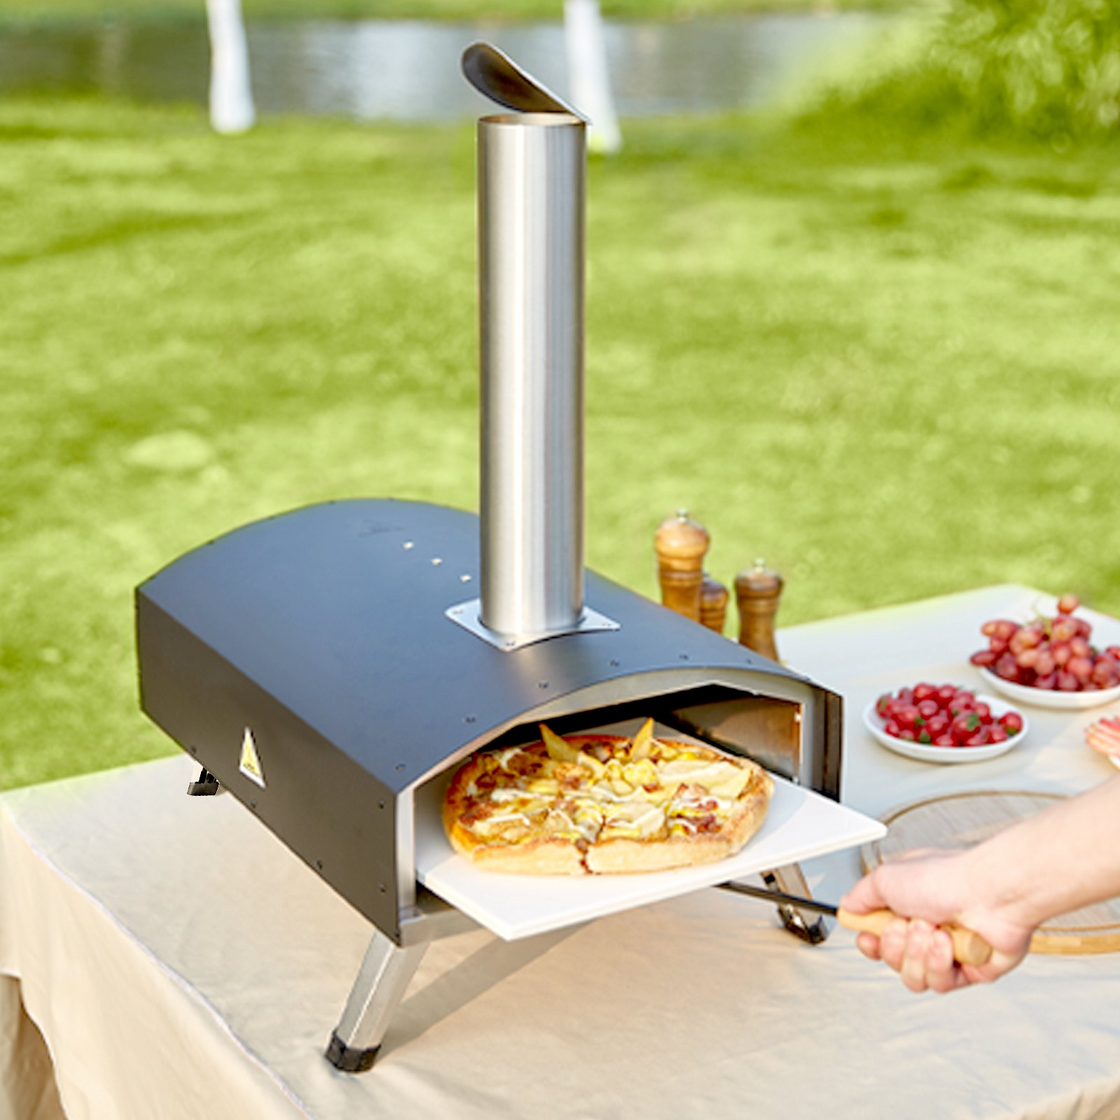 VEVOR Outdoor Oven 12-inch Pellet and Charcoal Fired Maker, Portable Outside Stainless Steel Grill with Pizza Stone, Waterproof Cover, Shovel, Wood Burner for Backyard Camping, Black